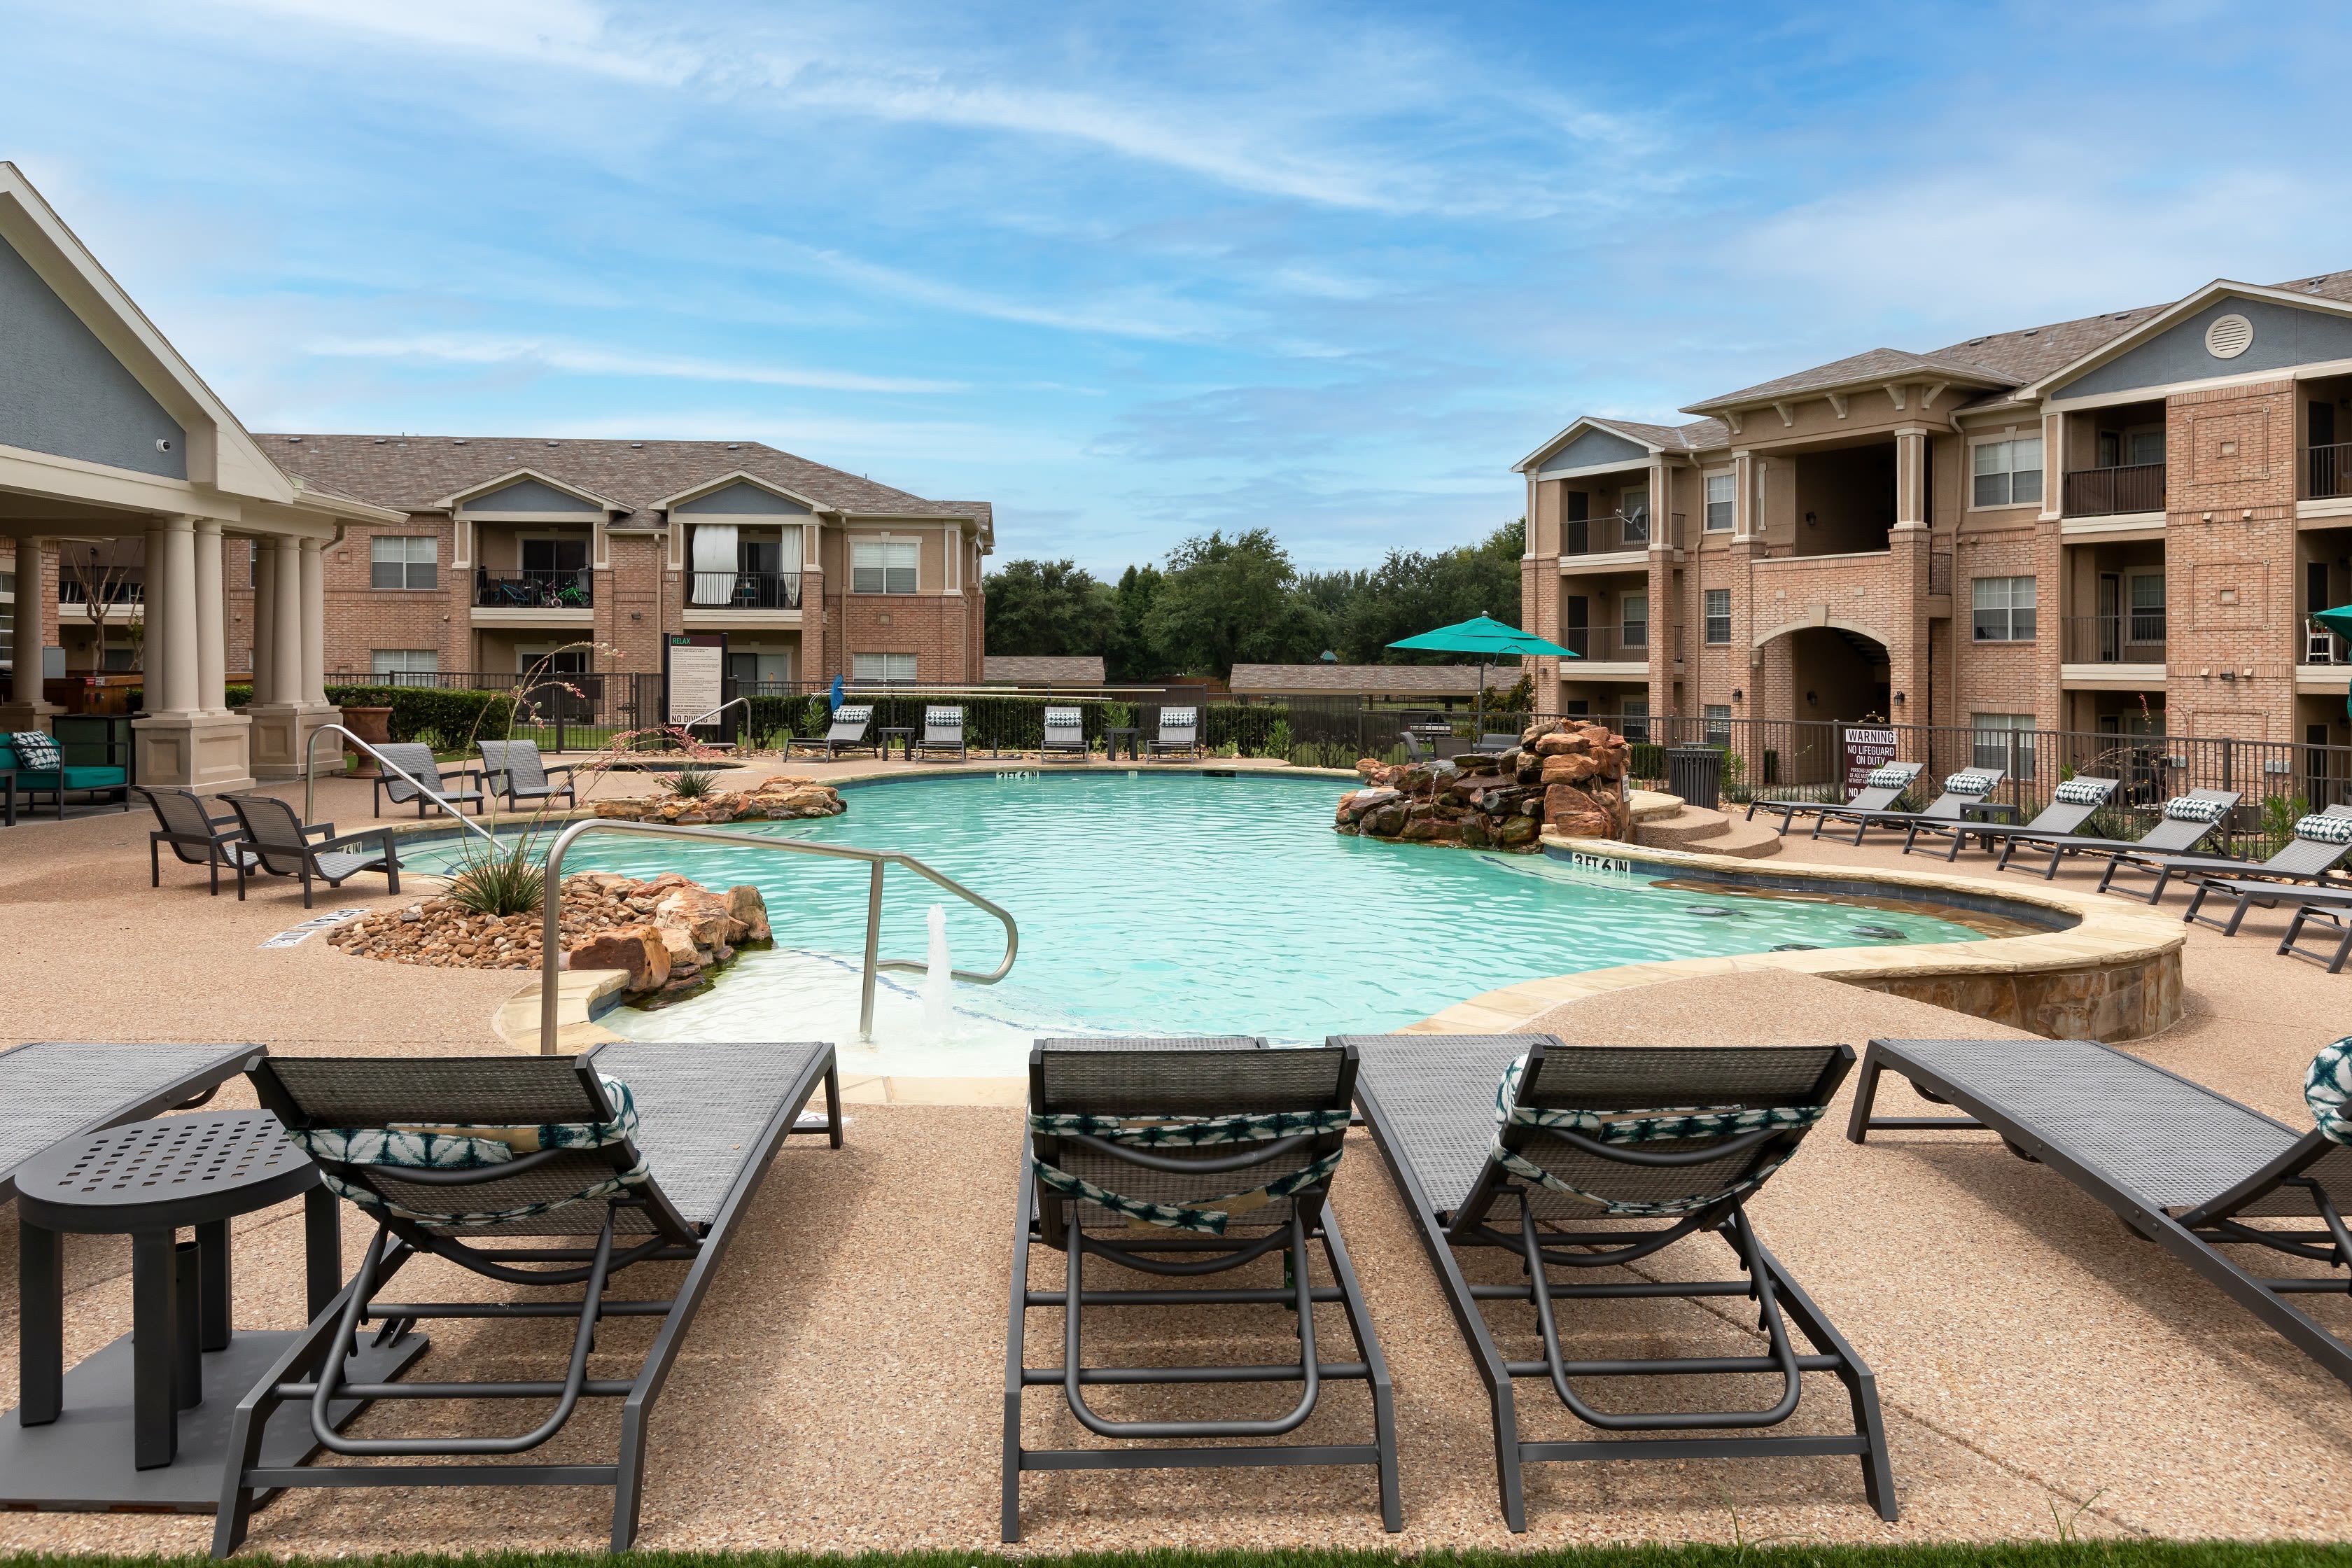 Swimming pool with a fountain on a sunny day at Ranch at Hudson Xing in McKinney, Texas